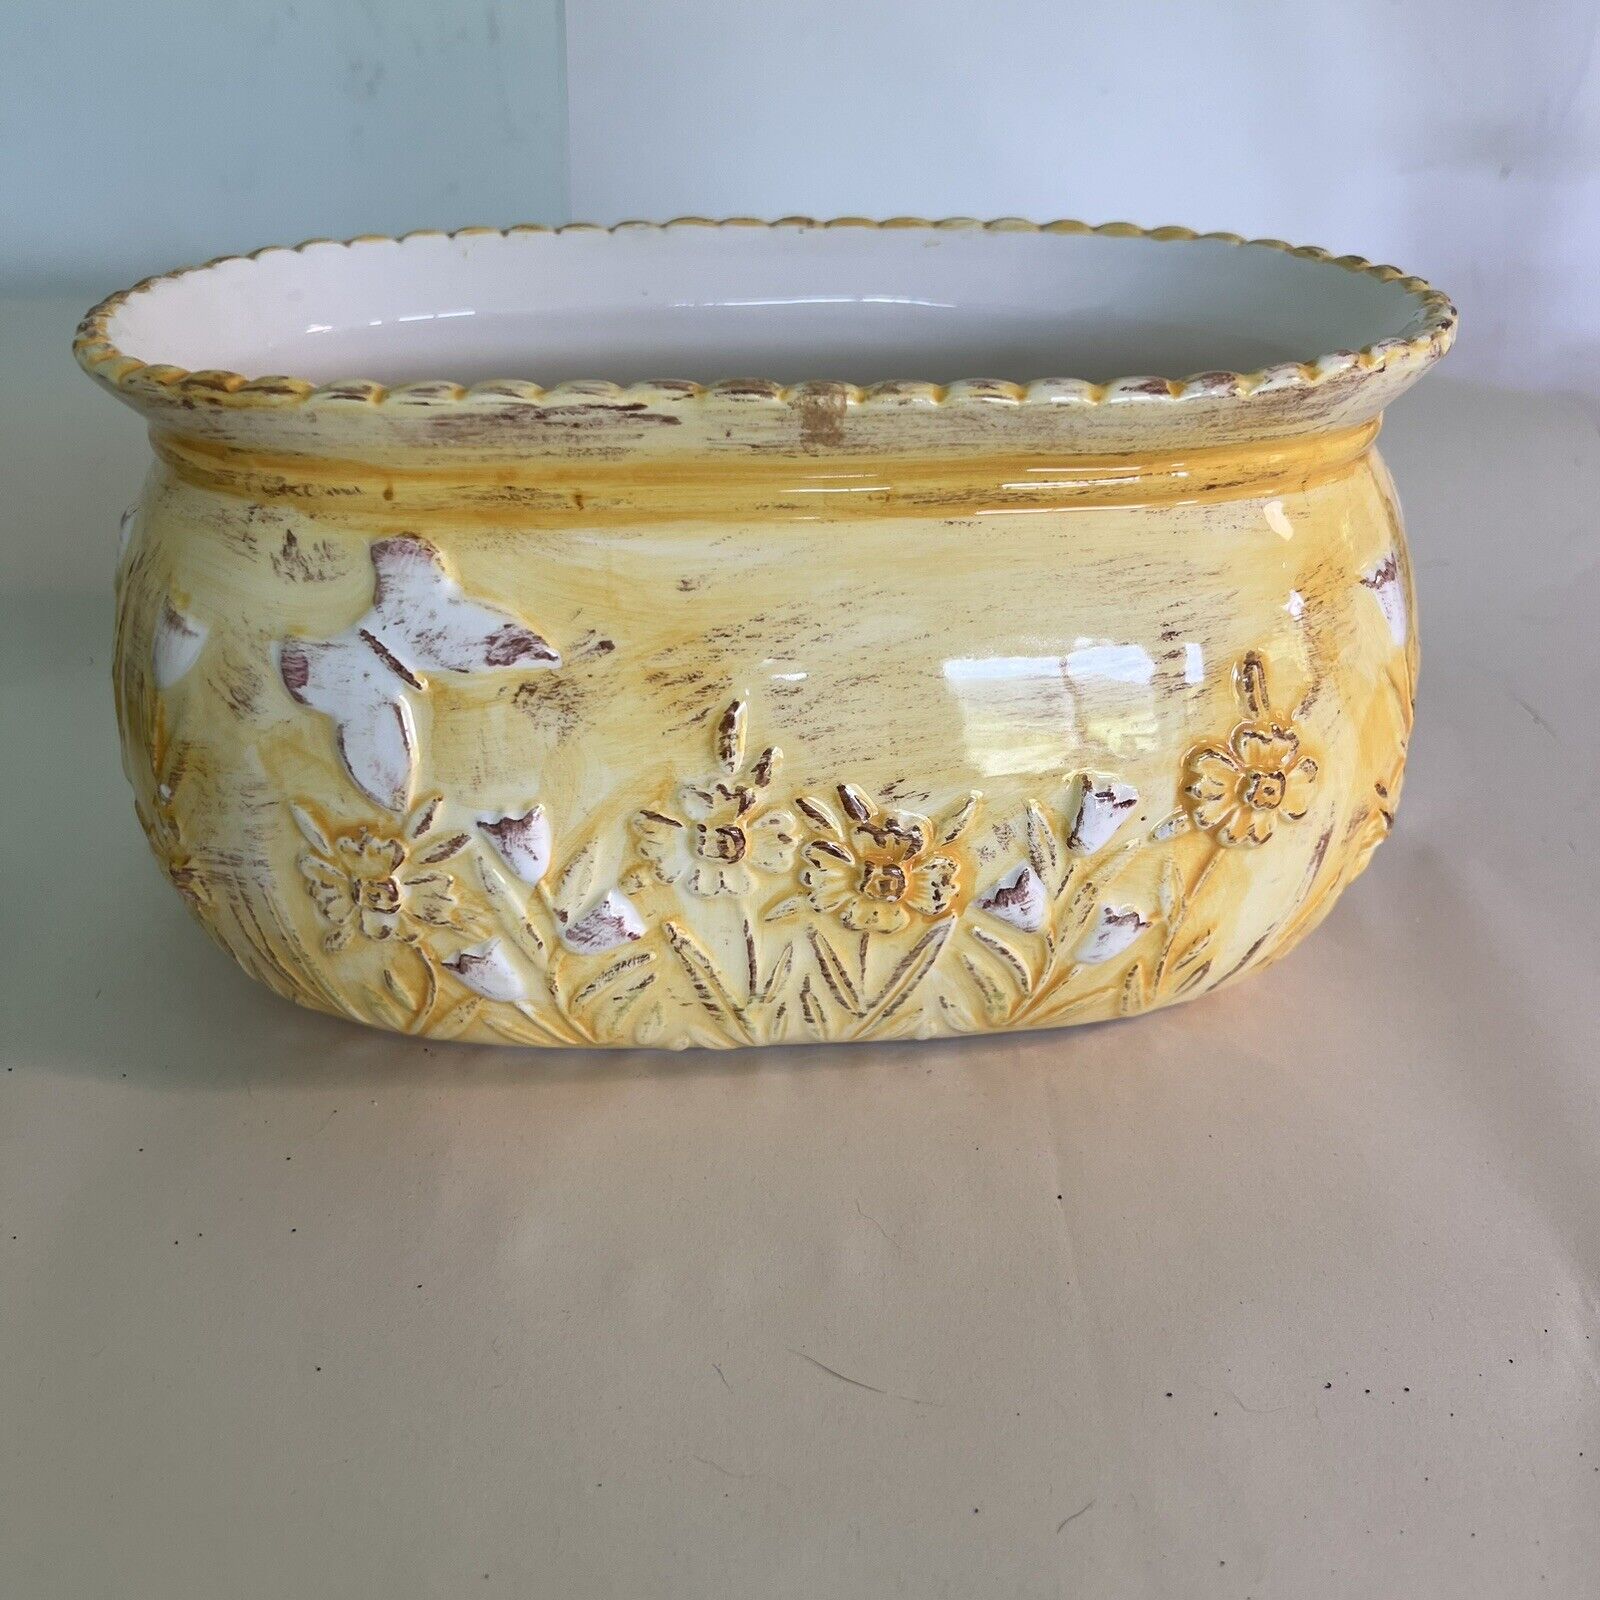 Oval Yellow/ White Butterfly Floral Design Planter Ceramic Scalloped Edges